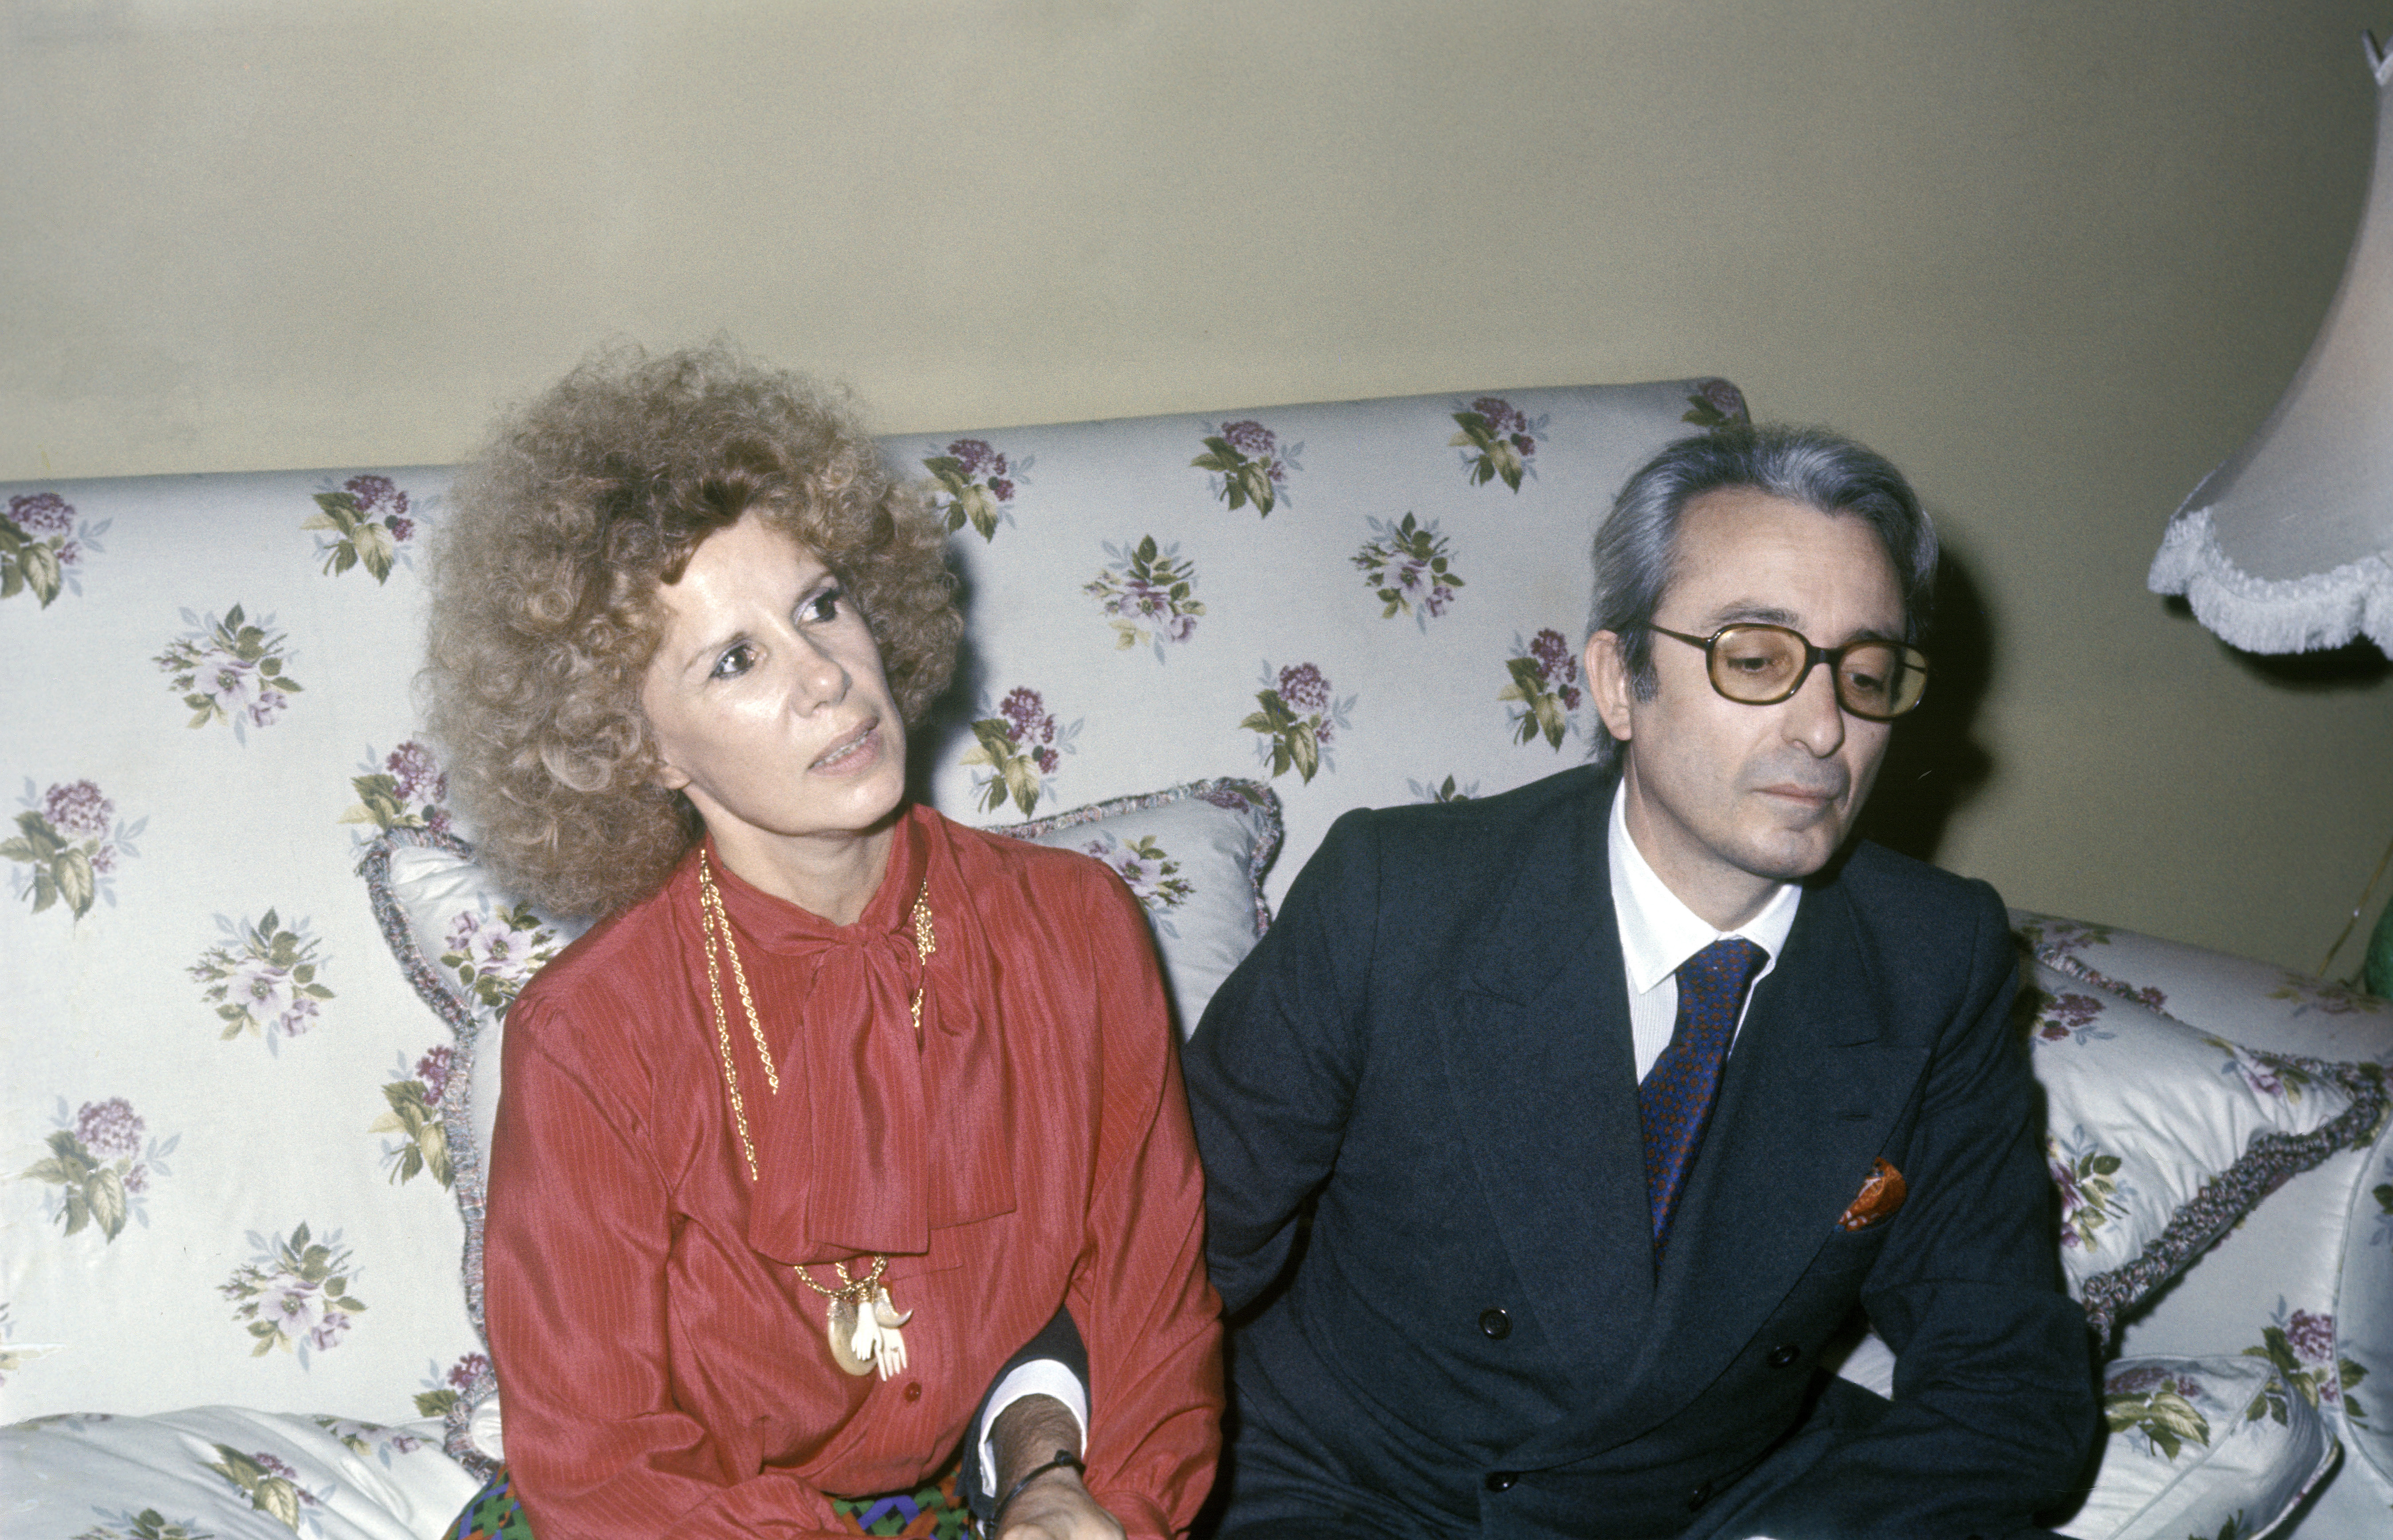 The Duchess of Alba, Maria del Rosario Cayetana Fitz-James Stuart and Jesus Aguirre in 1973. | Source: Getty Images